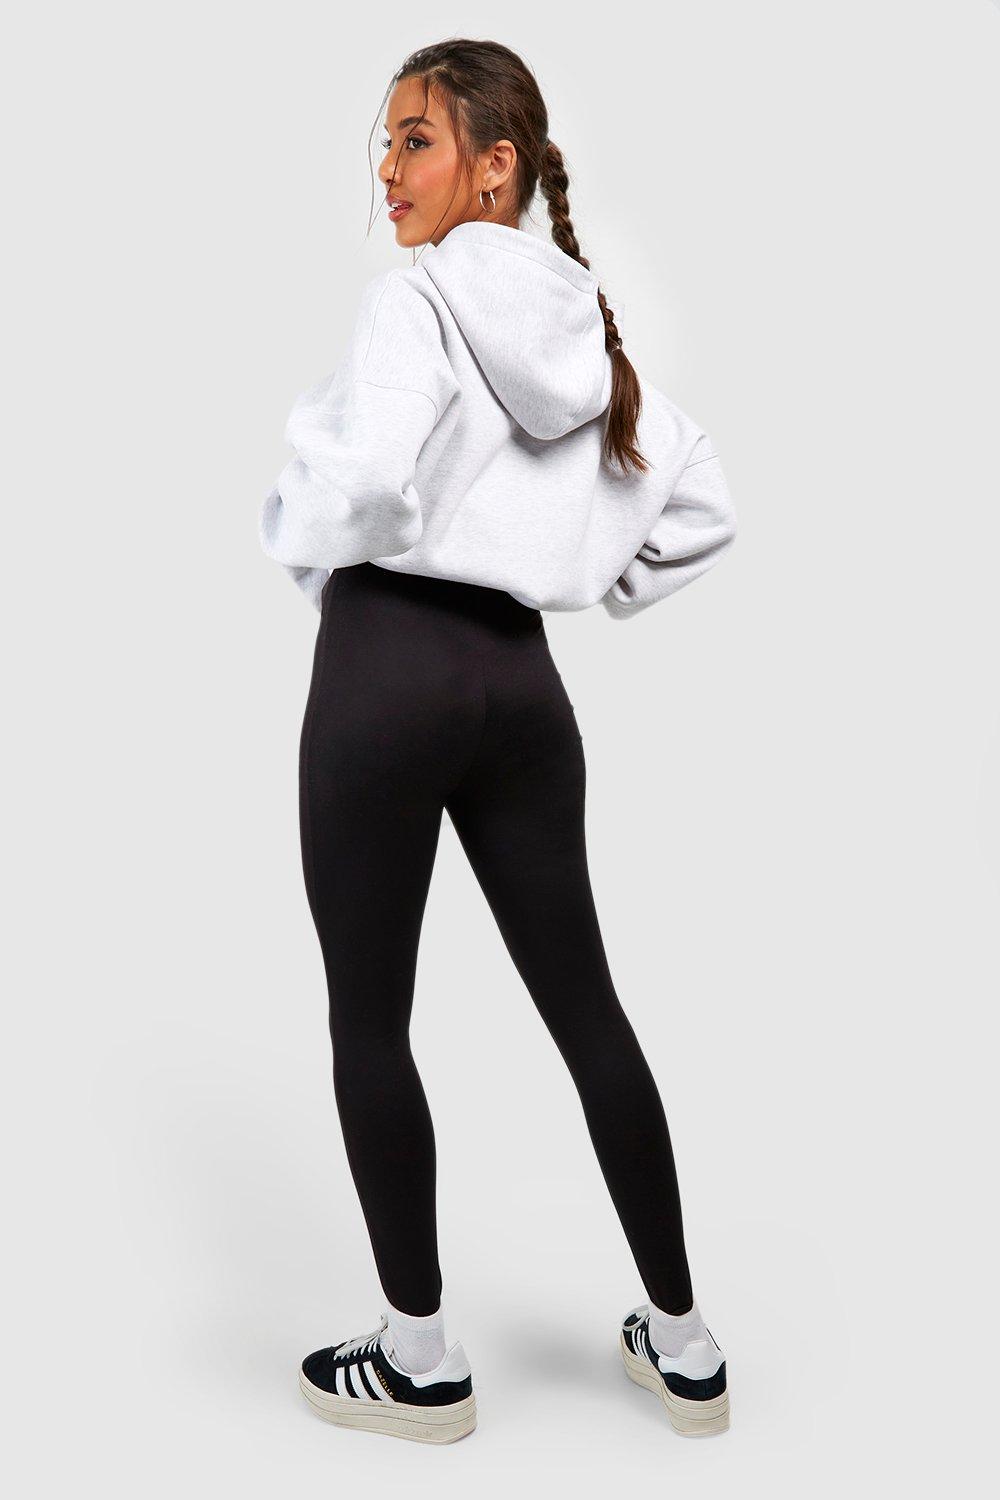 2 Pack Essential Leggings at Cotton Traders